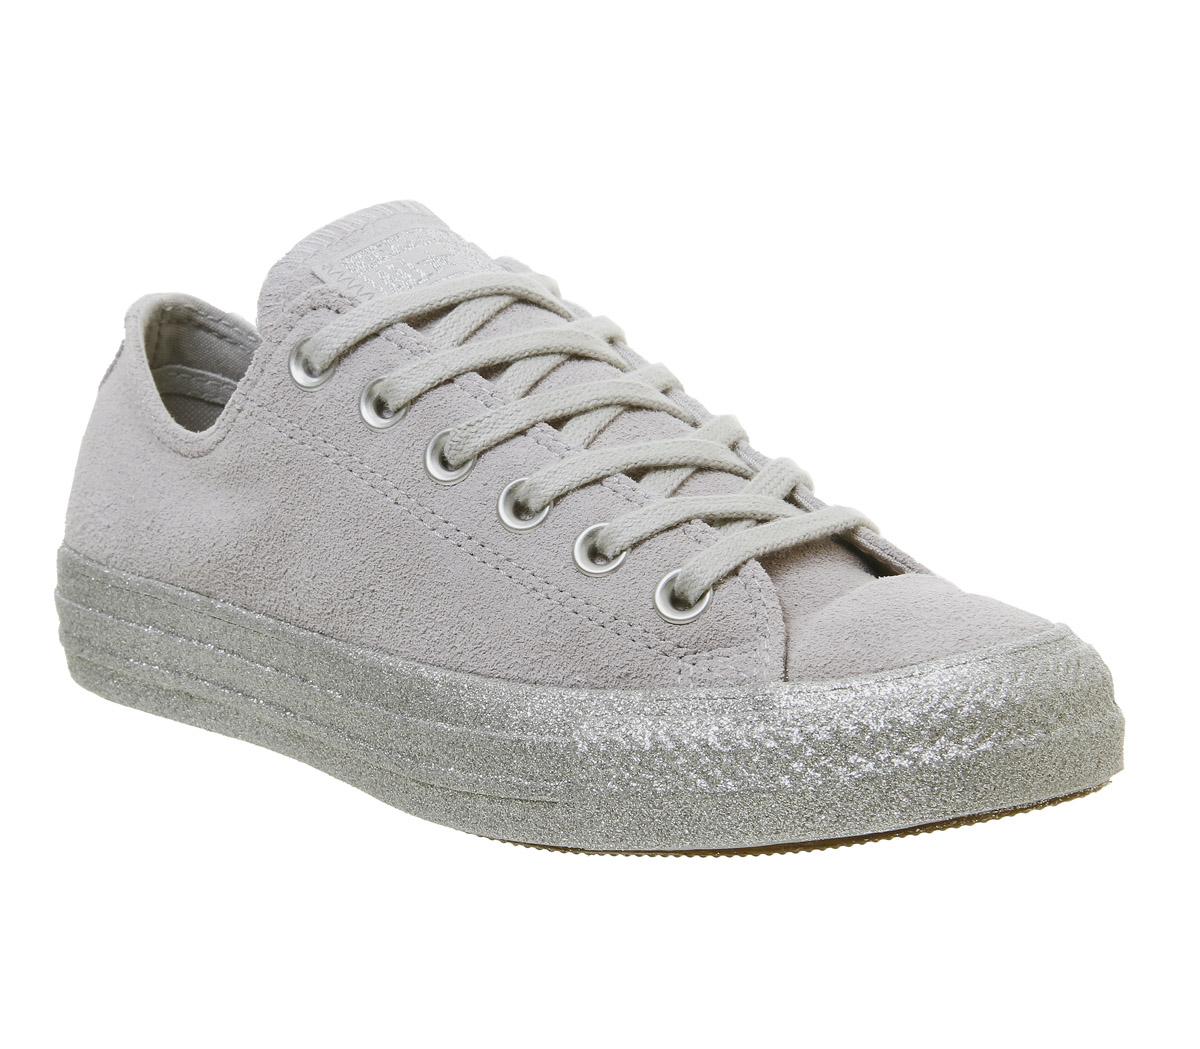 Converse Converse All Star Low Trainers Ash Grey Silver Glitter Exclusive -  Hers trainers